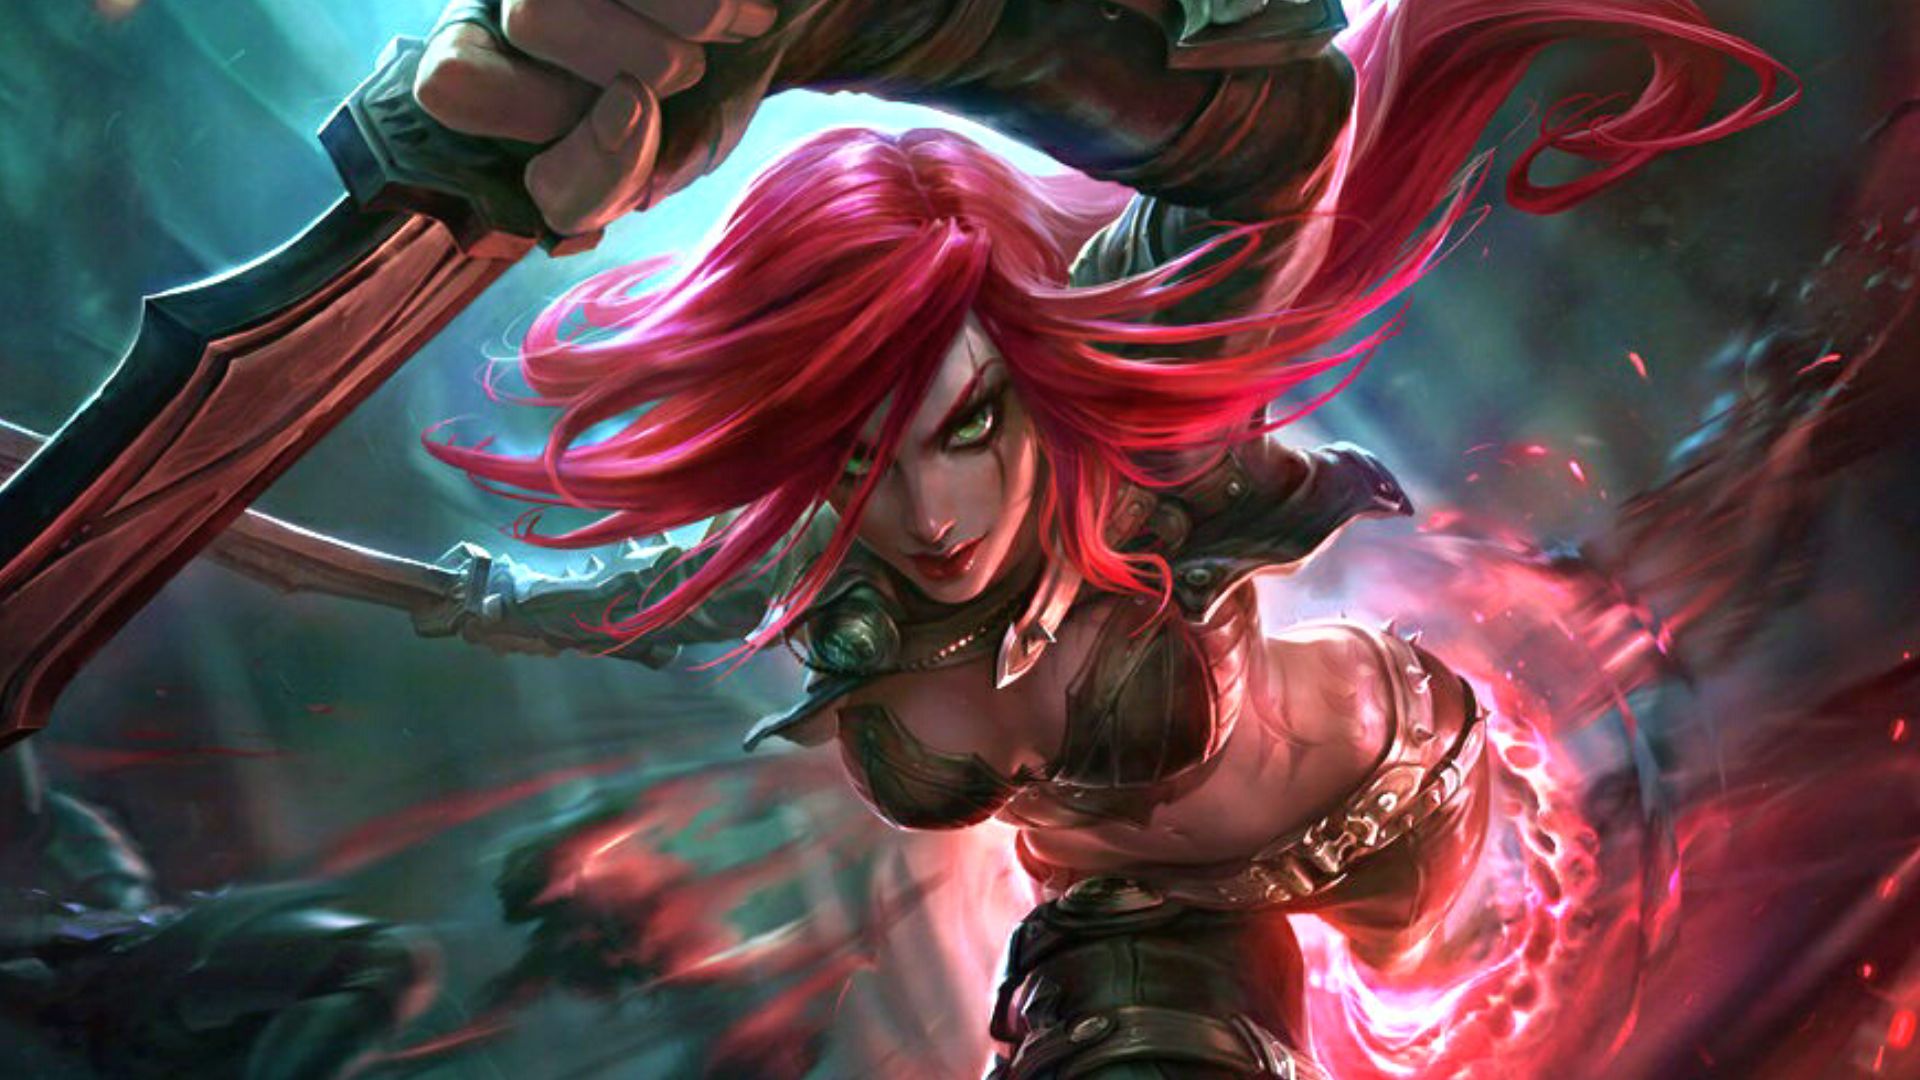 User Discontent with League of Legends' Quick-Play Mode